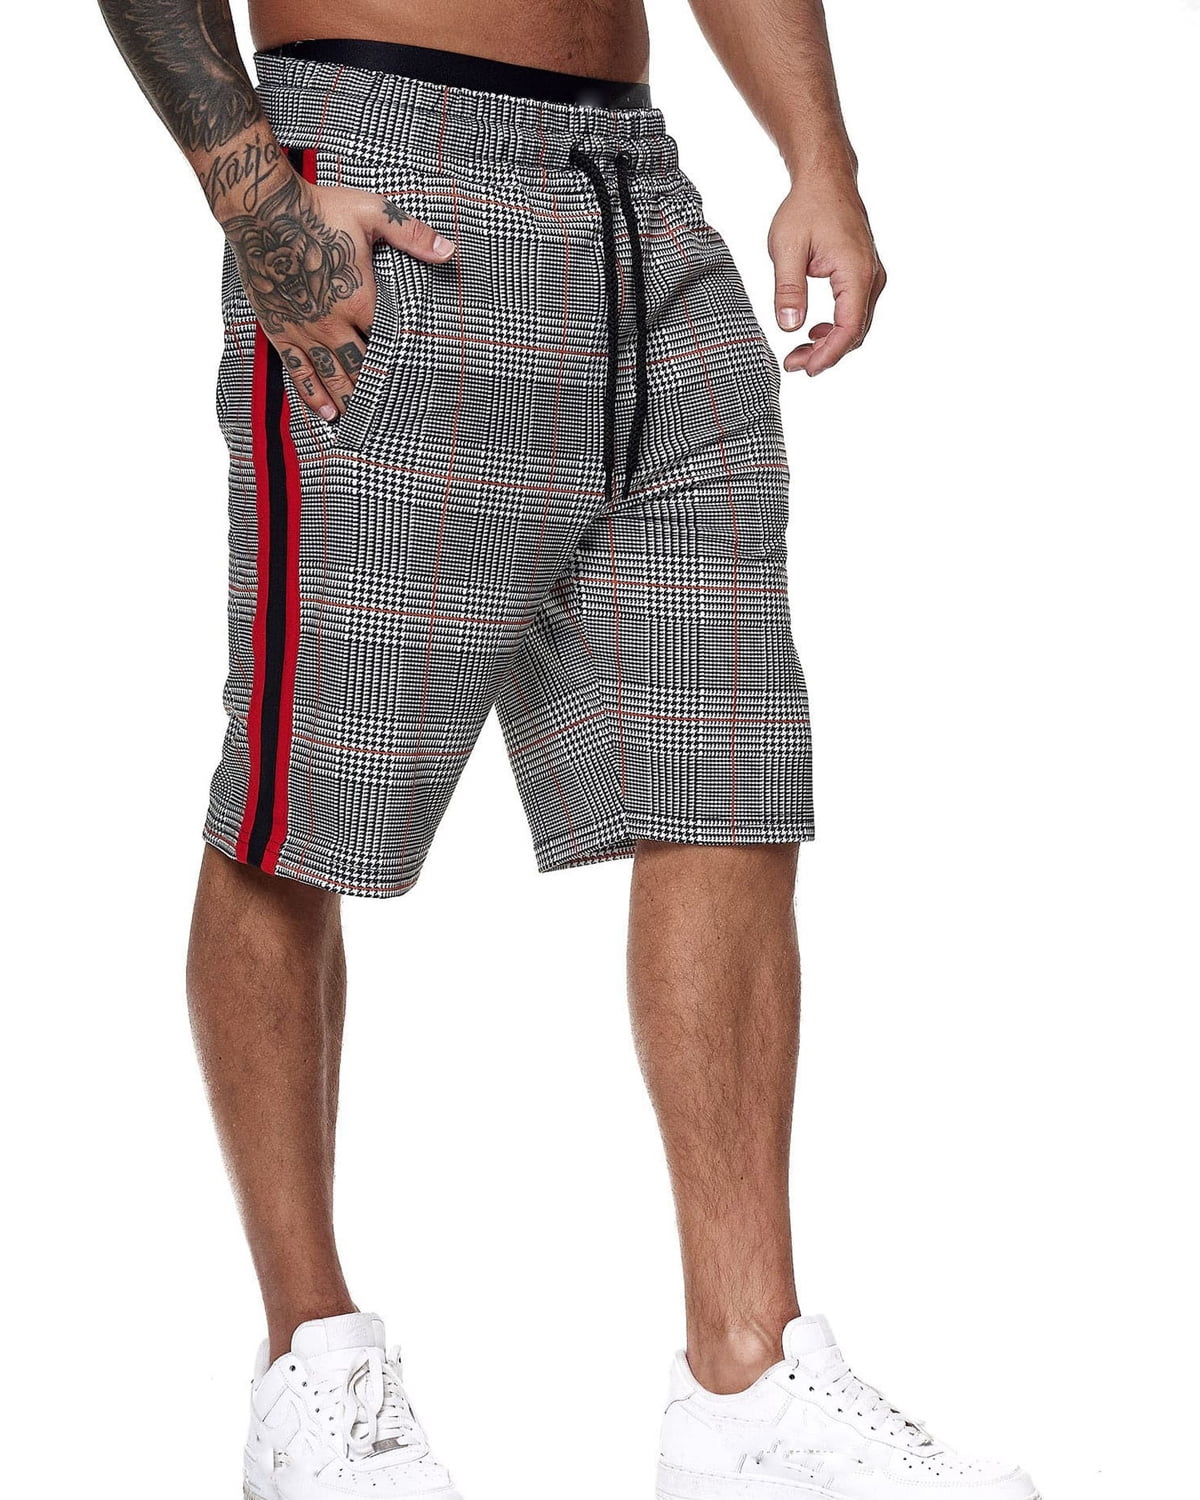 DressU Mens Relaxed-Fit Pocket Plaid Leisure Beach Shorts with Elastic Waist and Pockets